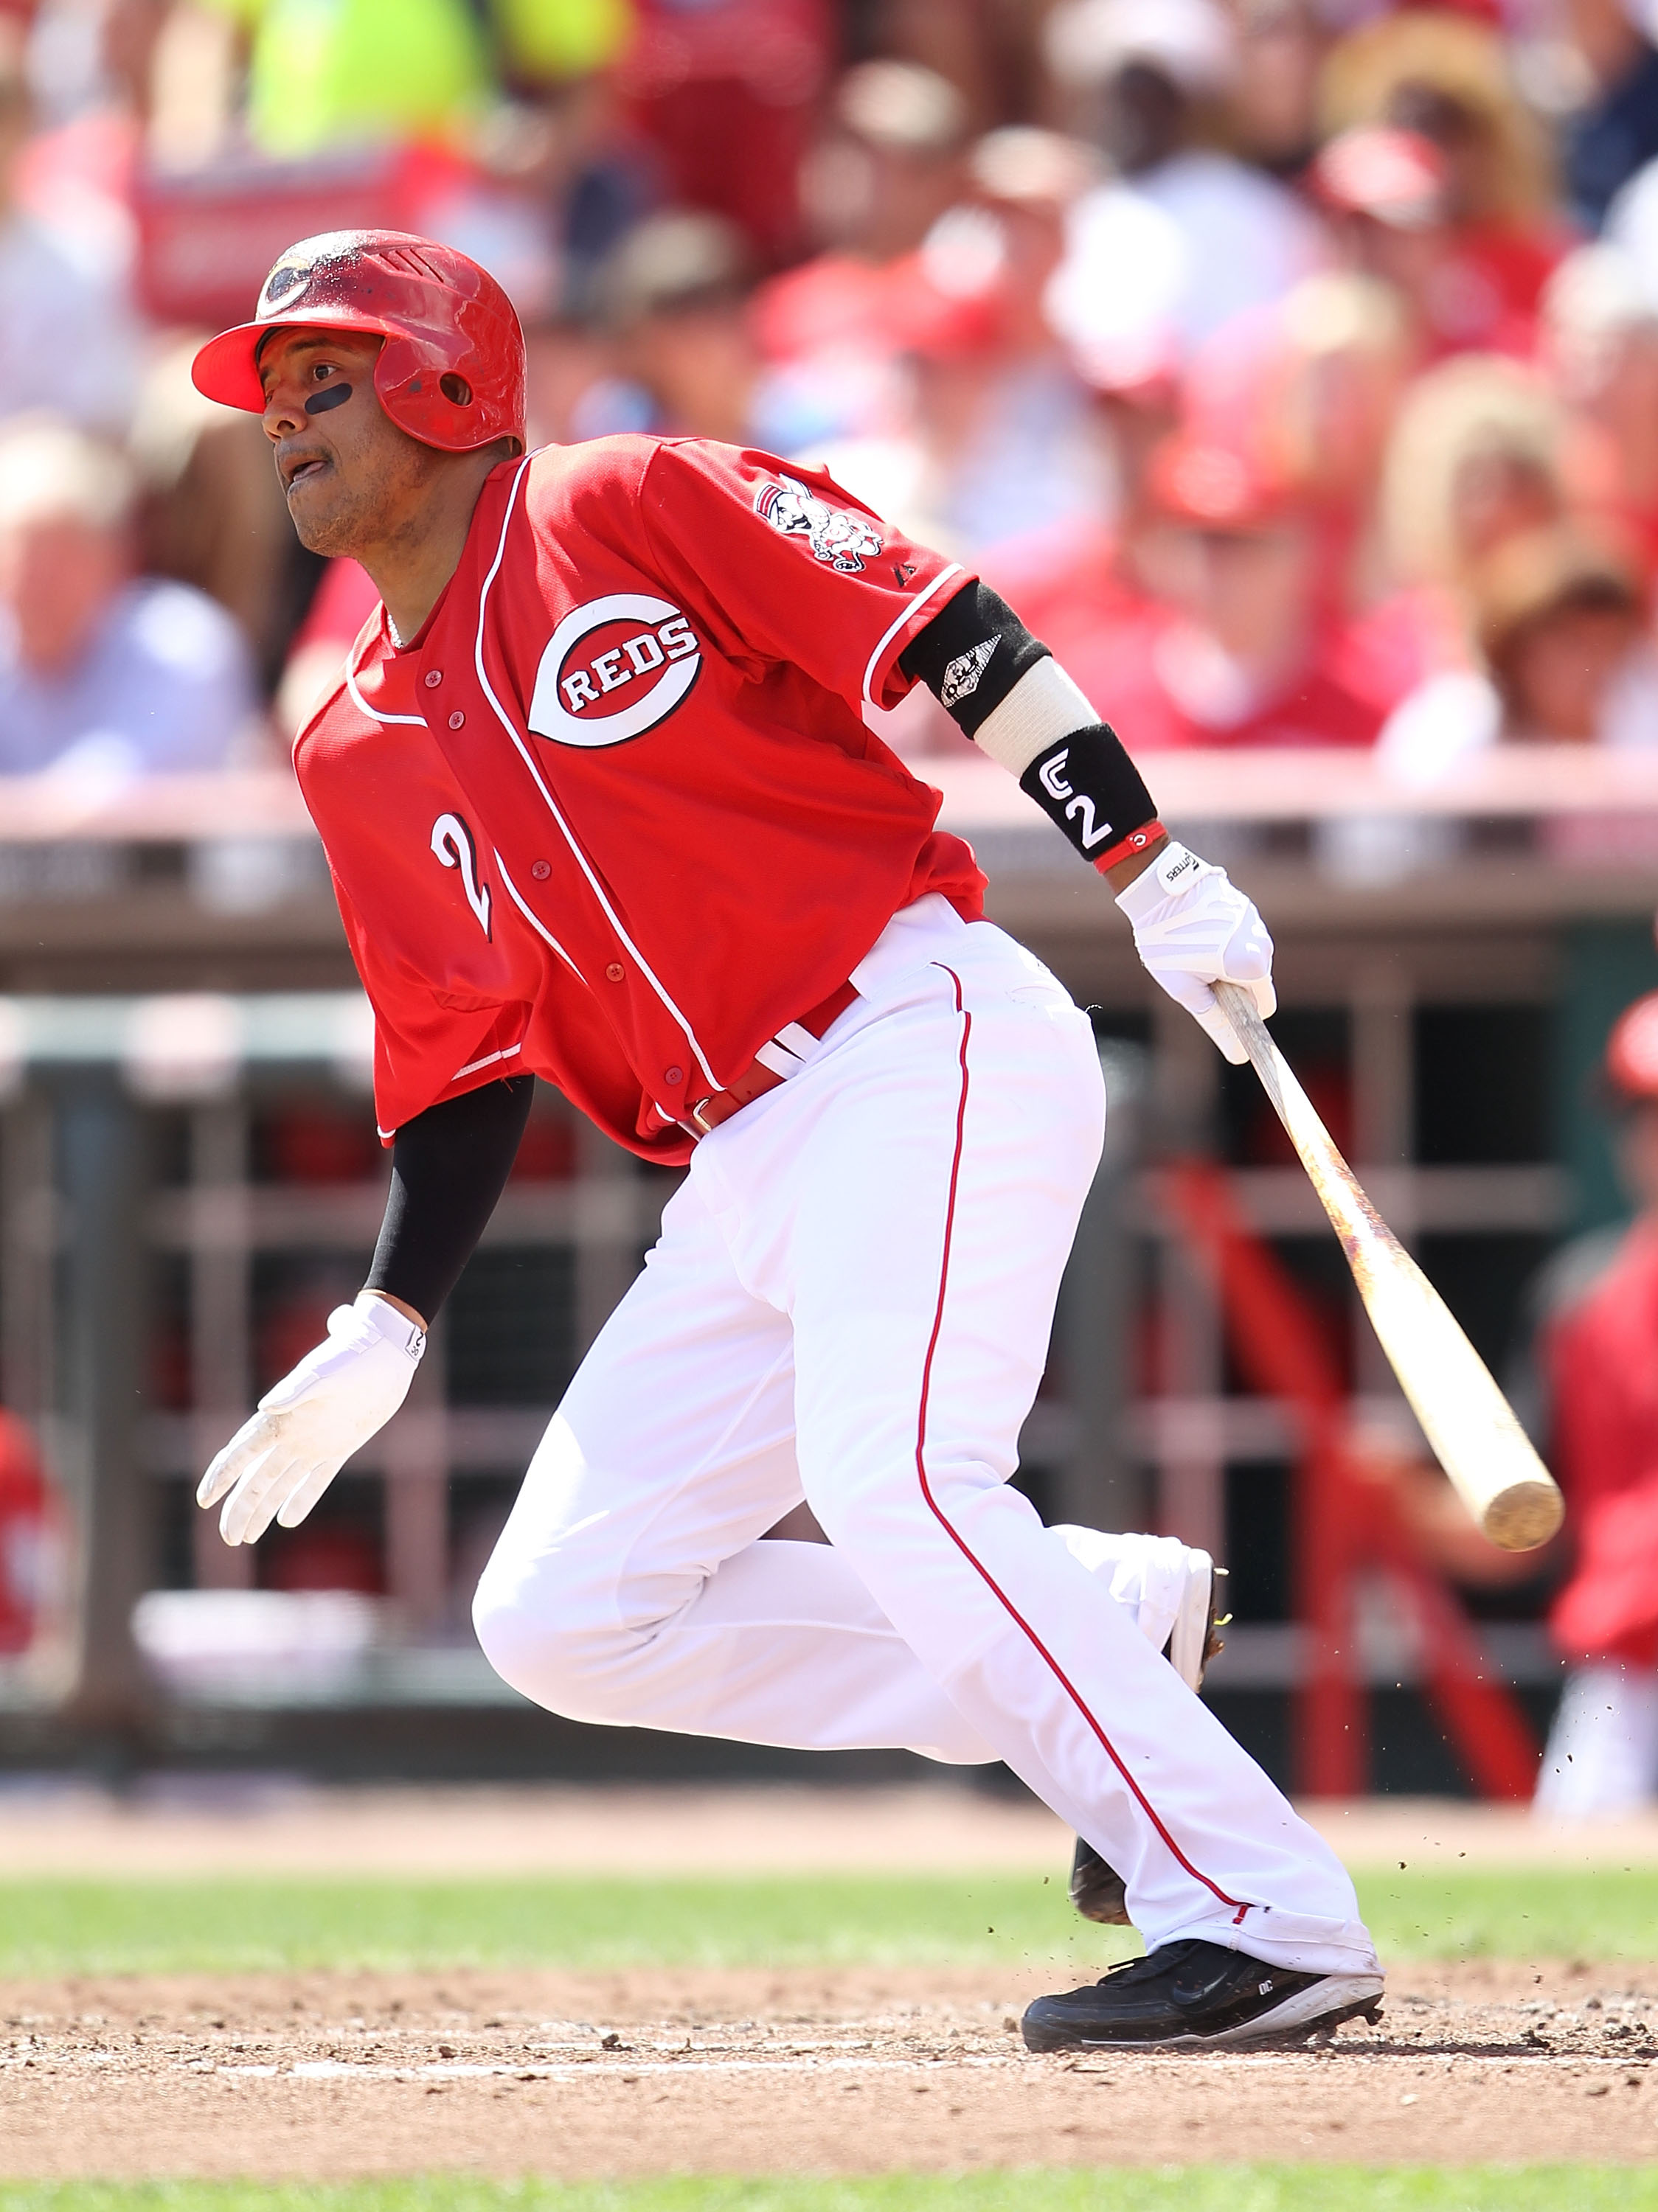 CINCINNATI - SEPTEMBER 12: Orlando Cabrera #2 of the Cincinnati Reds hits a double in the fourth inning during the game against the Pittsburgh Pirates at Great American Ballpark on September 12, 2010 in Cincinnati, Ohio.  (Photo by Andy Lyons/Getty Images